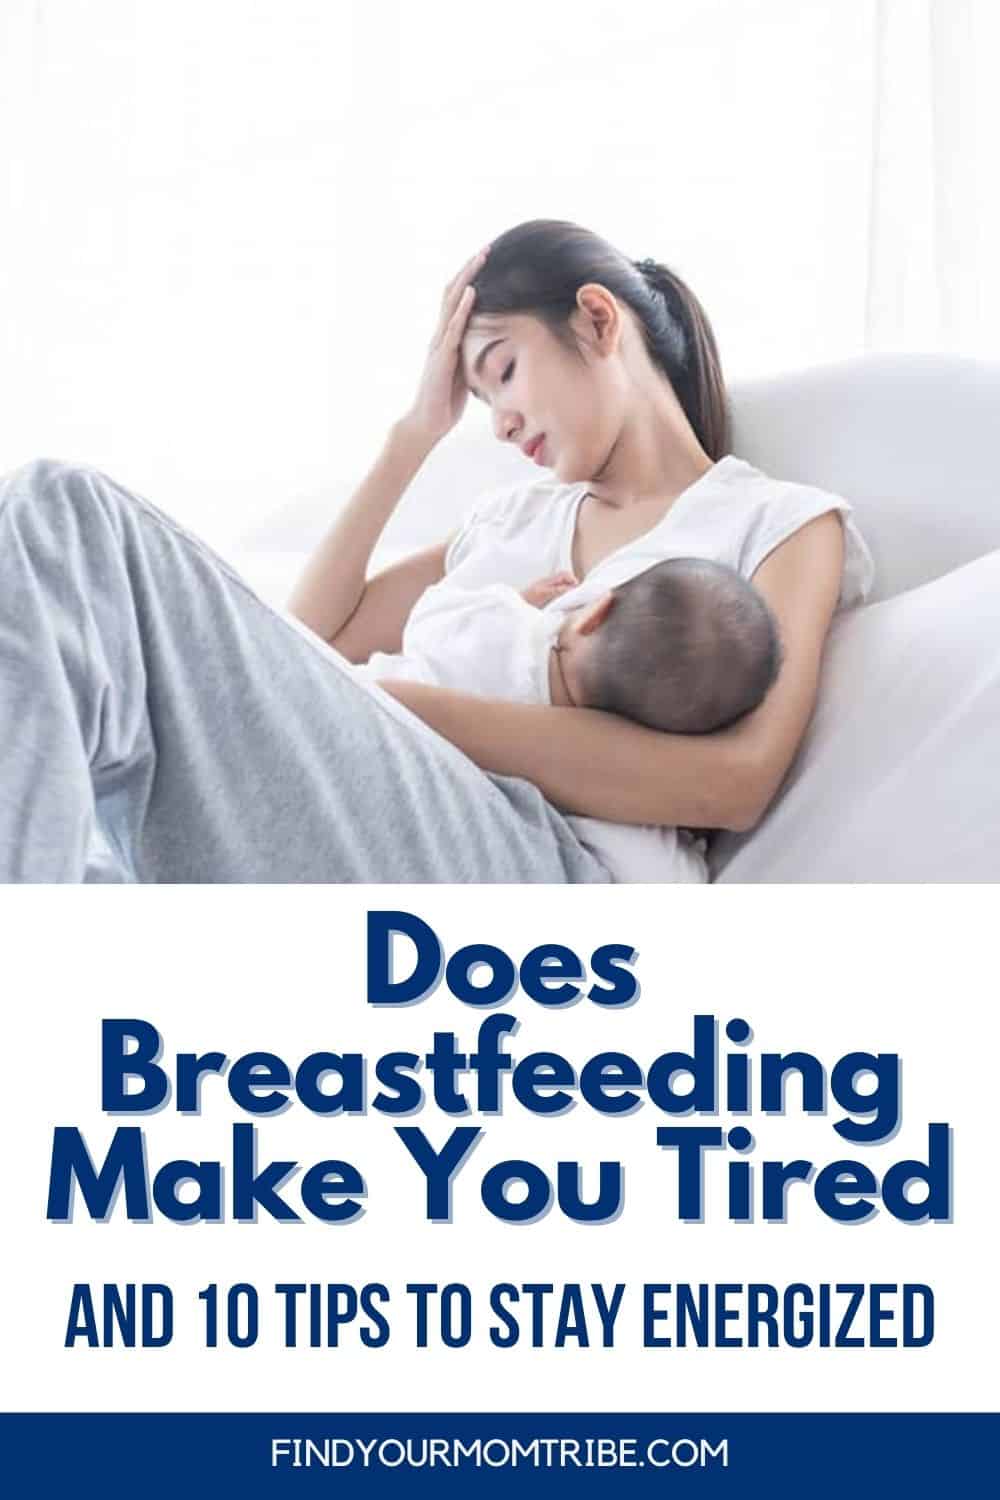 Does Breastfeeding Make You Tired And 10 Tips To Stay Energized